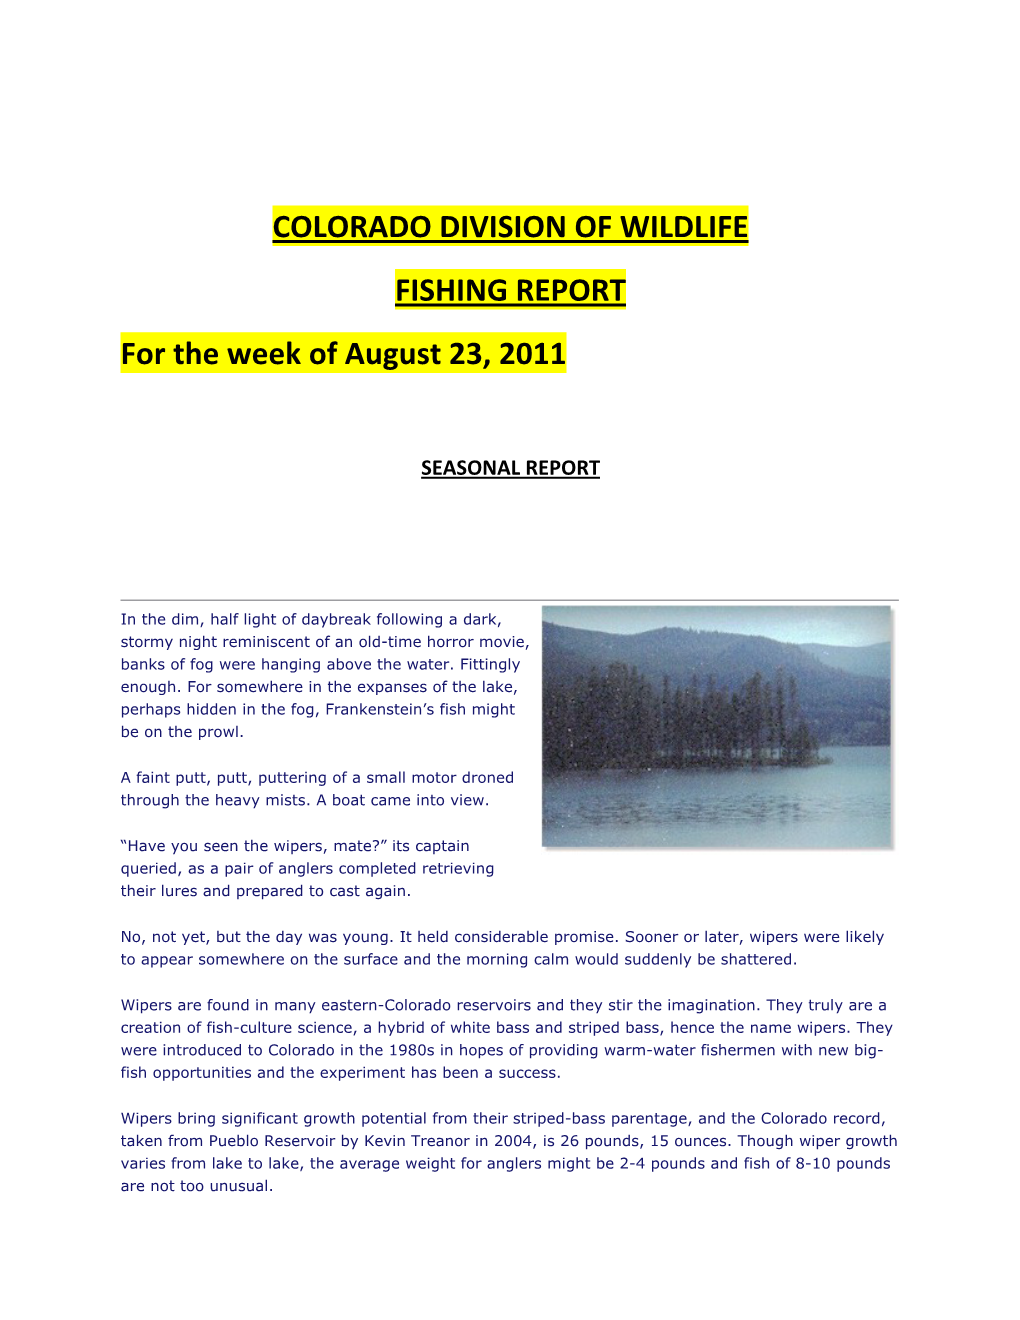 COLORADO DIVISION of WILDLIFE FISHING REPORT for the Week of August 23, 2011